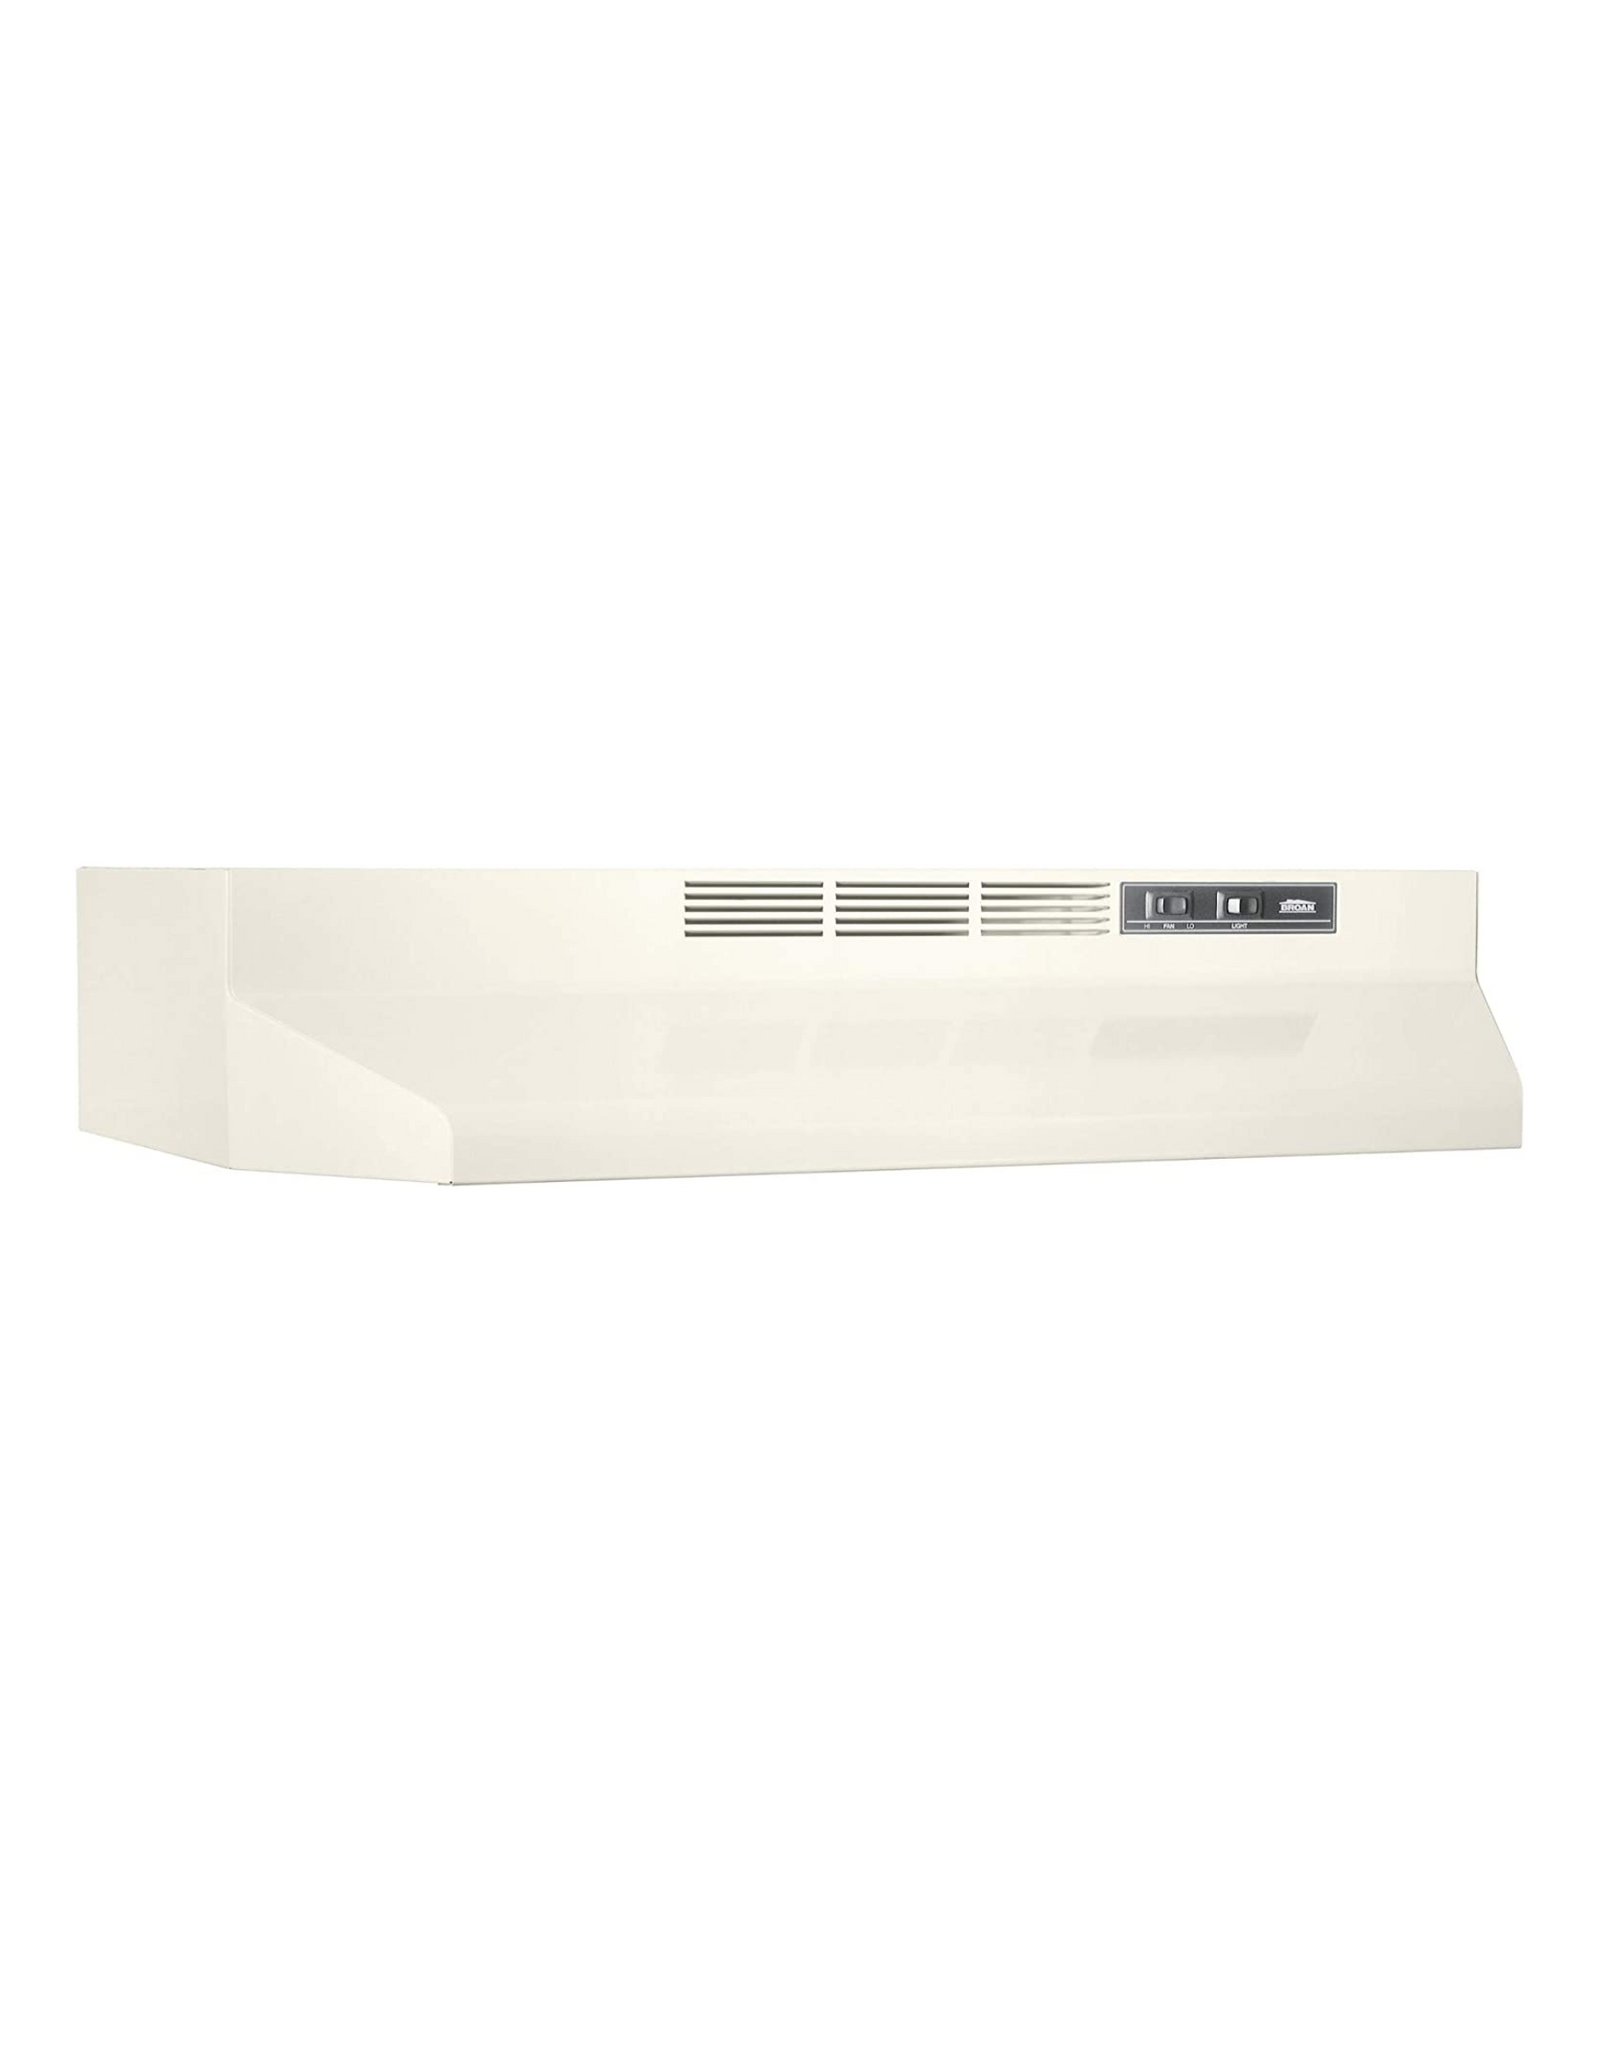 Broan-NuTone 413002 Non-Ducted Ductless Range Hood, 30", Bisque